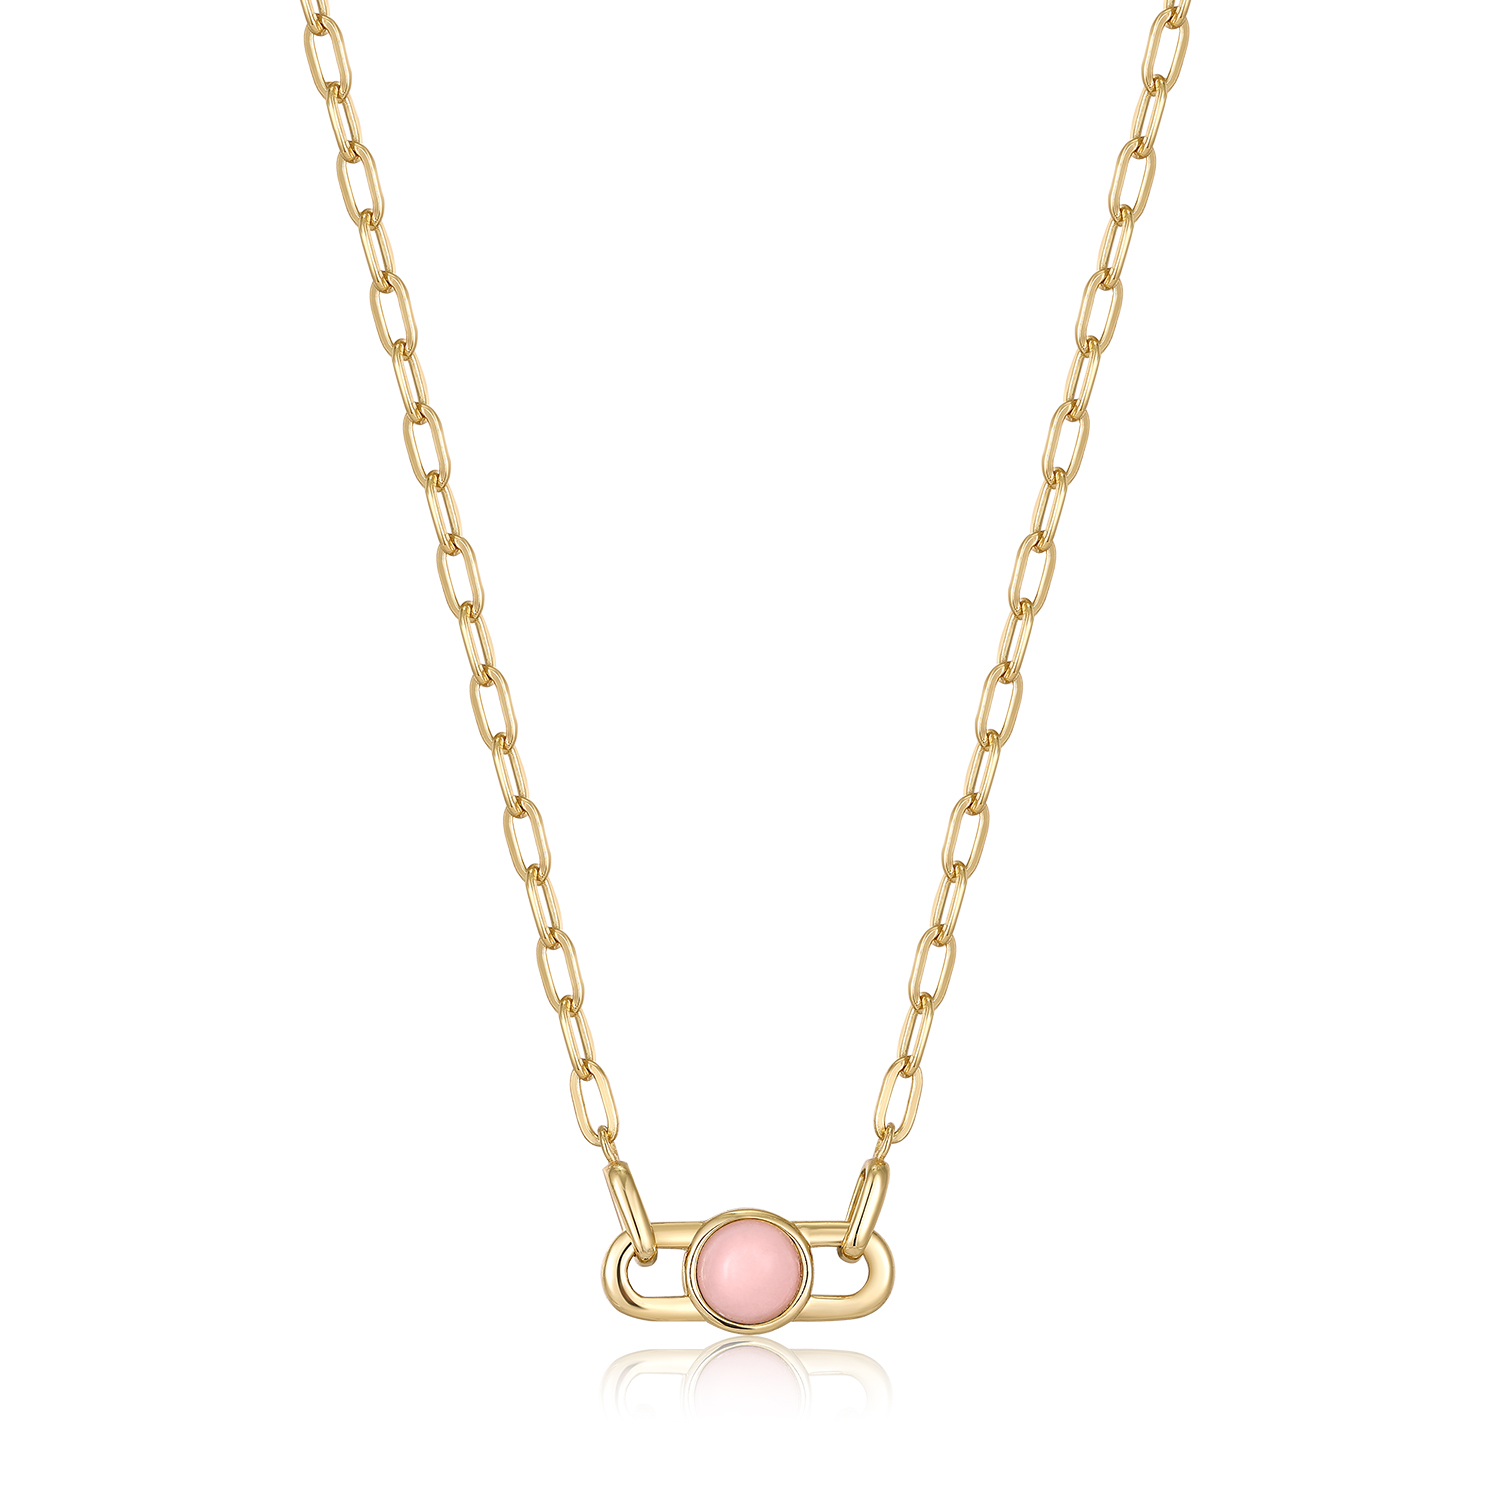 ANIA HAIE Orb Rose Quartz Link Necklace, Gold-plated